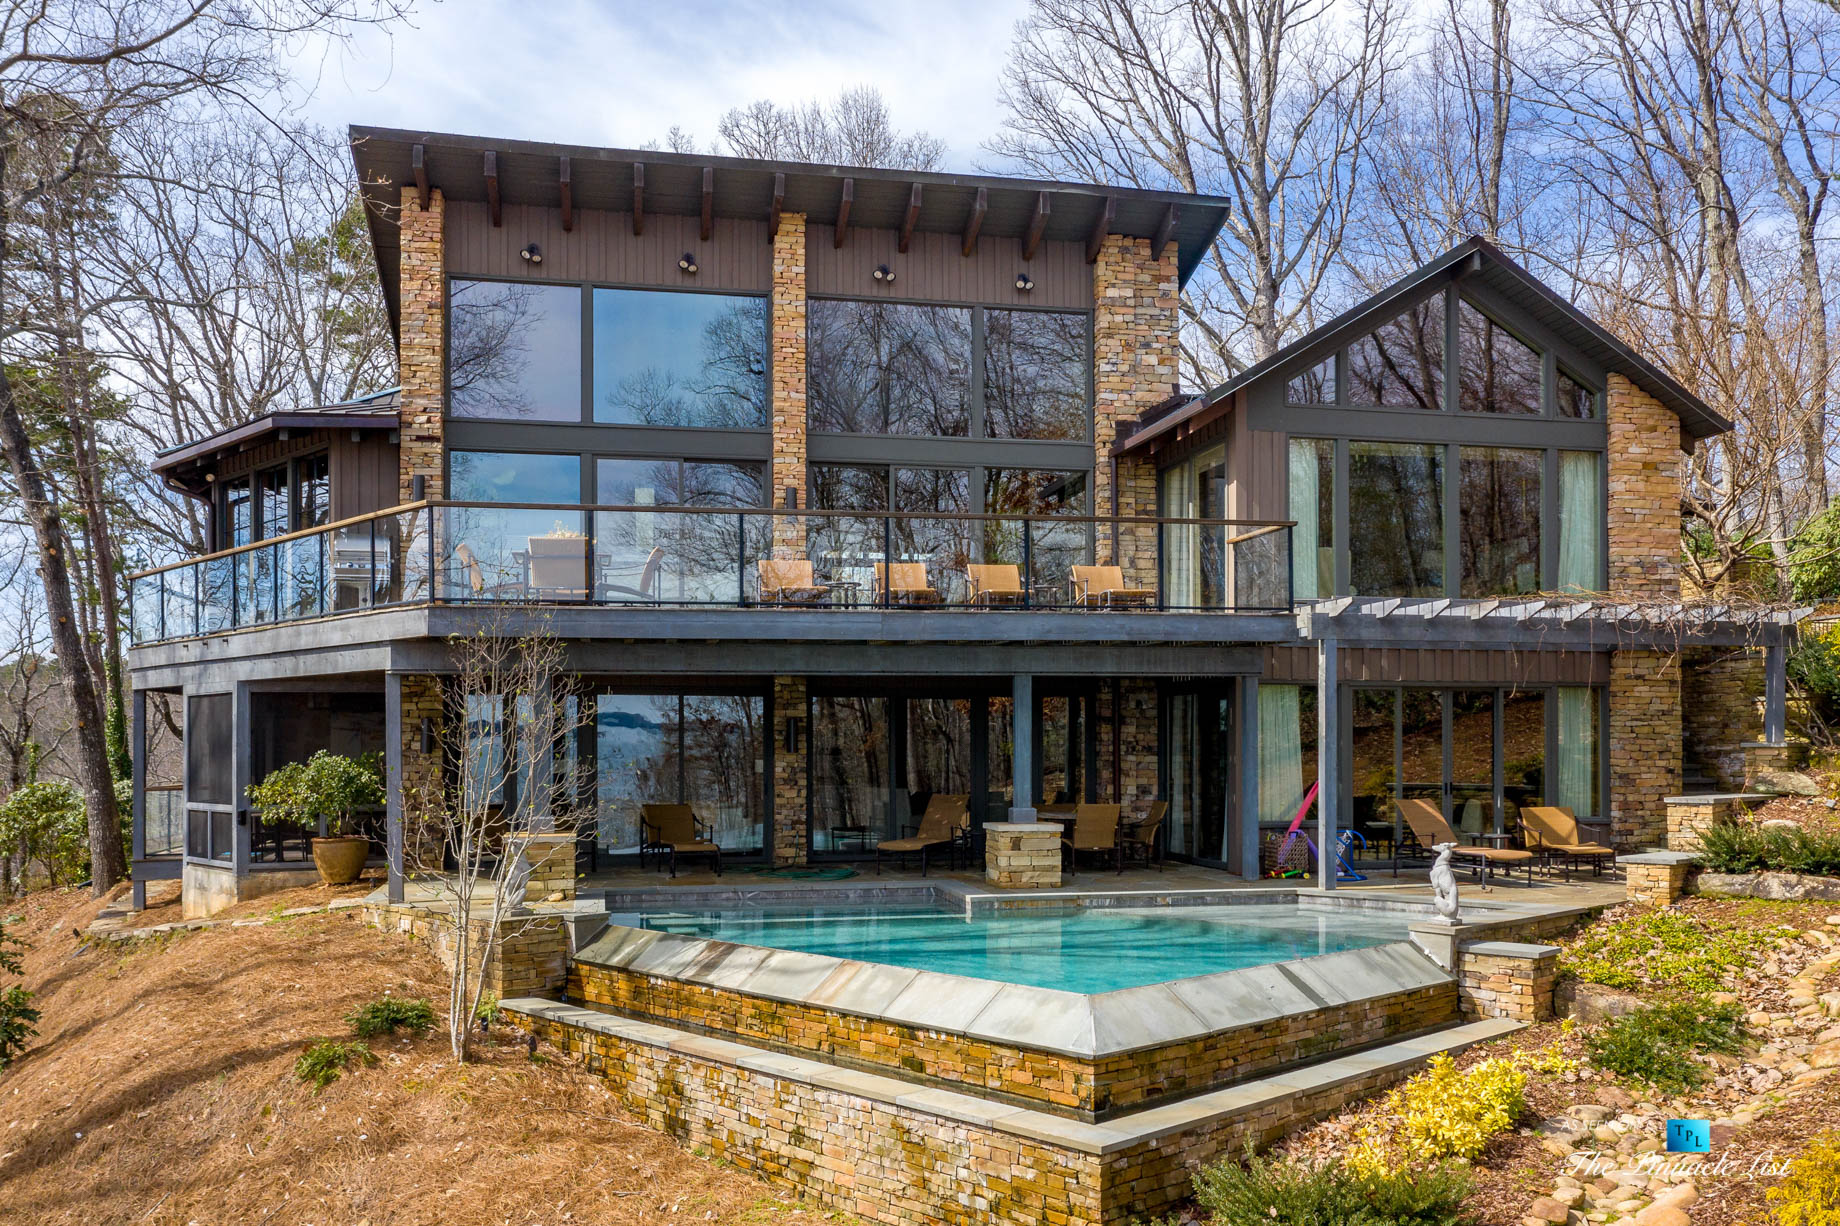 7860 Chestnut Hill Rd, Cumming, GA, USA – Exterior Deck and Pool – Luxury Real Estate – Lake Lanier Mid-Century Modern Stone Home